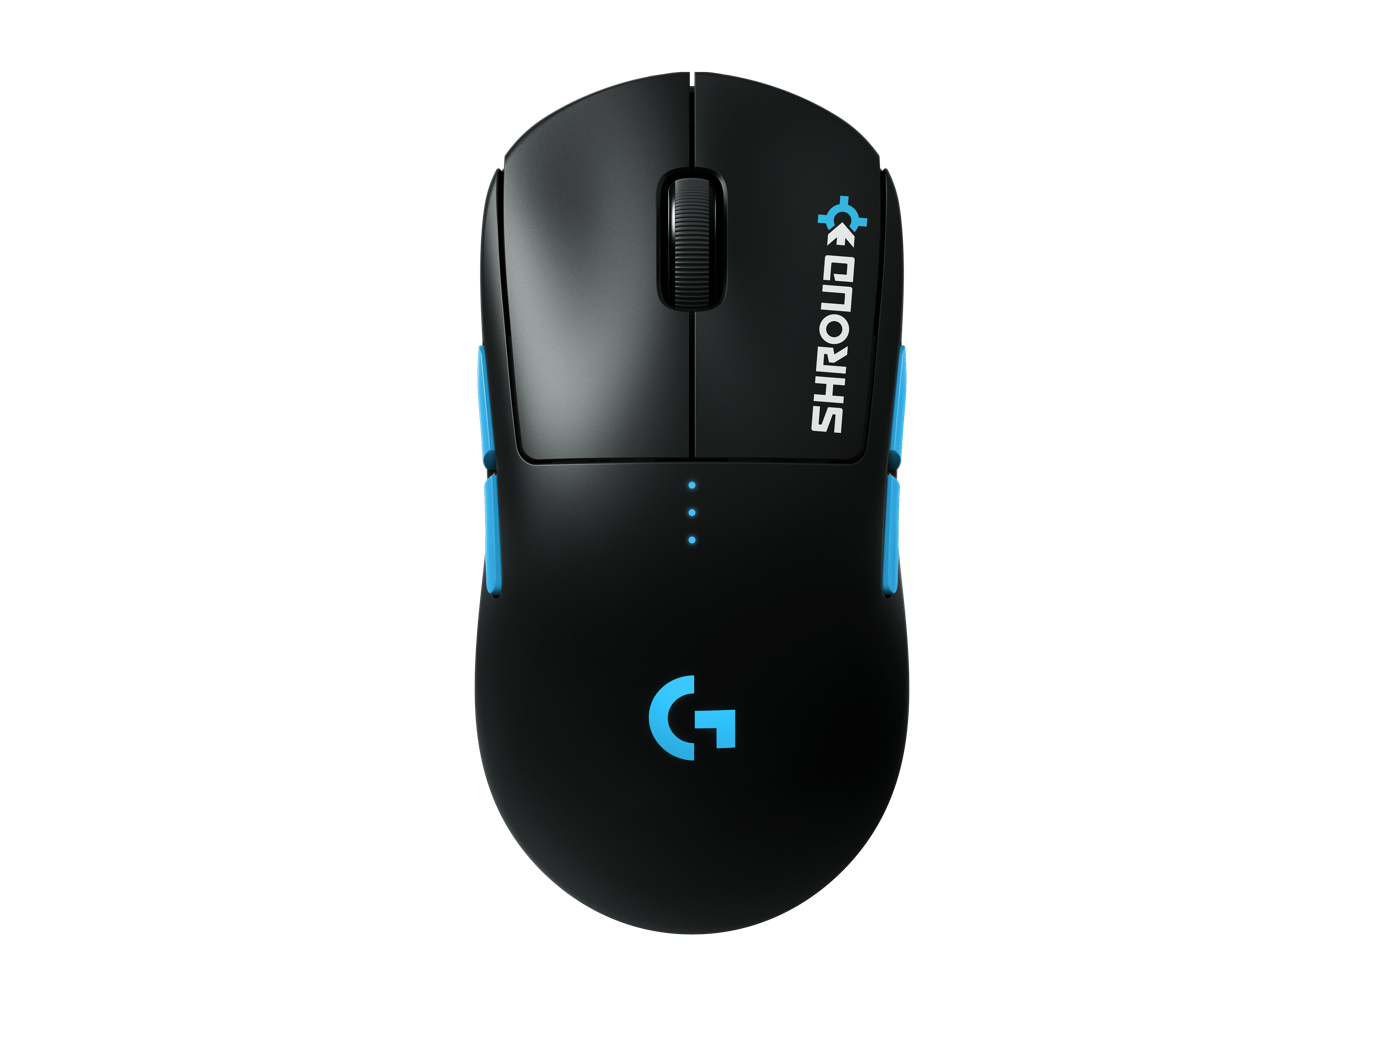 Logitech G PRO Wireless Optical Gaming Mouse with RGB Lighting in Black Shroud